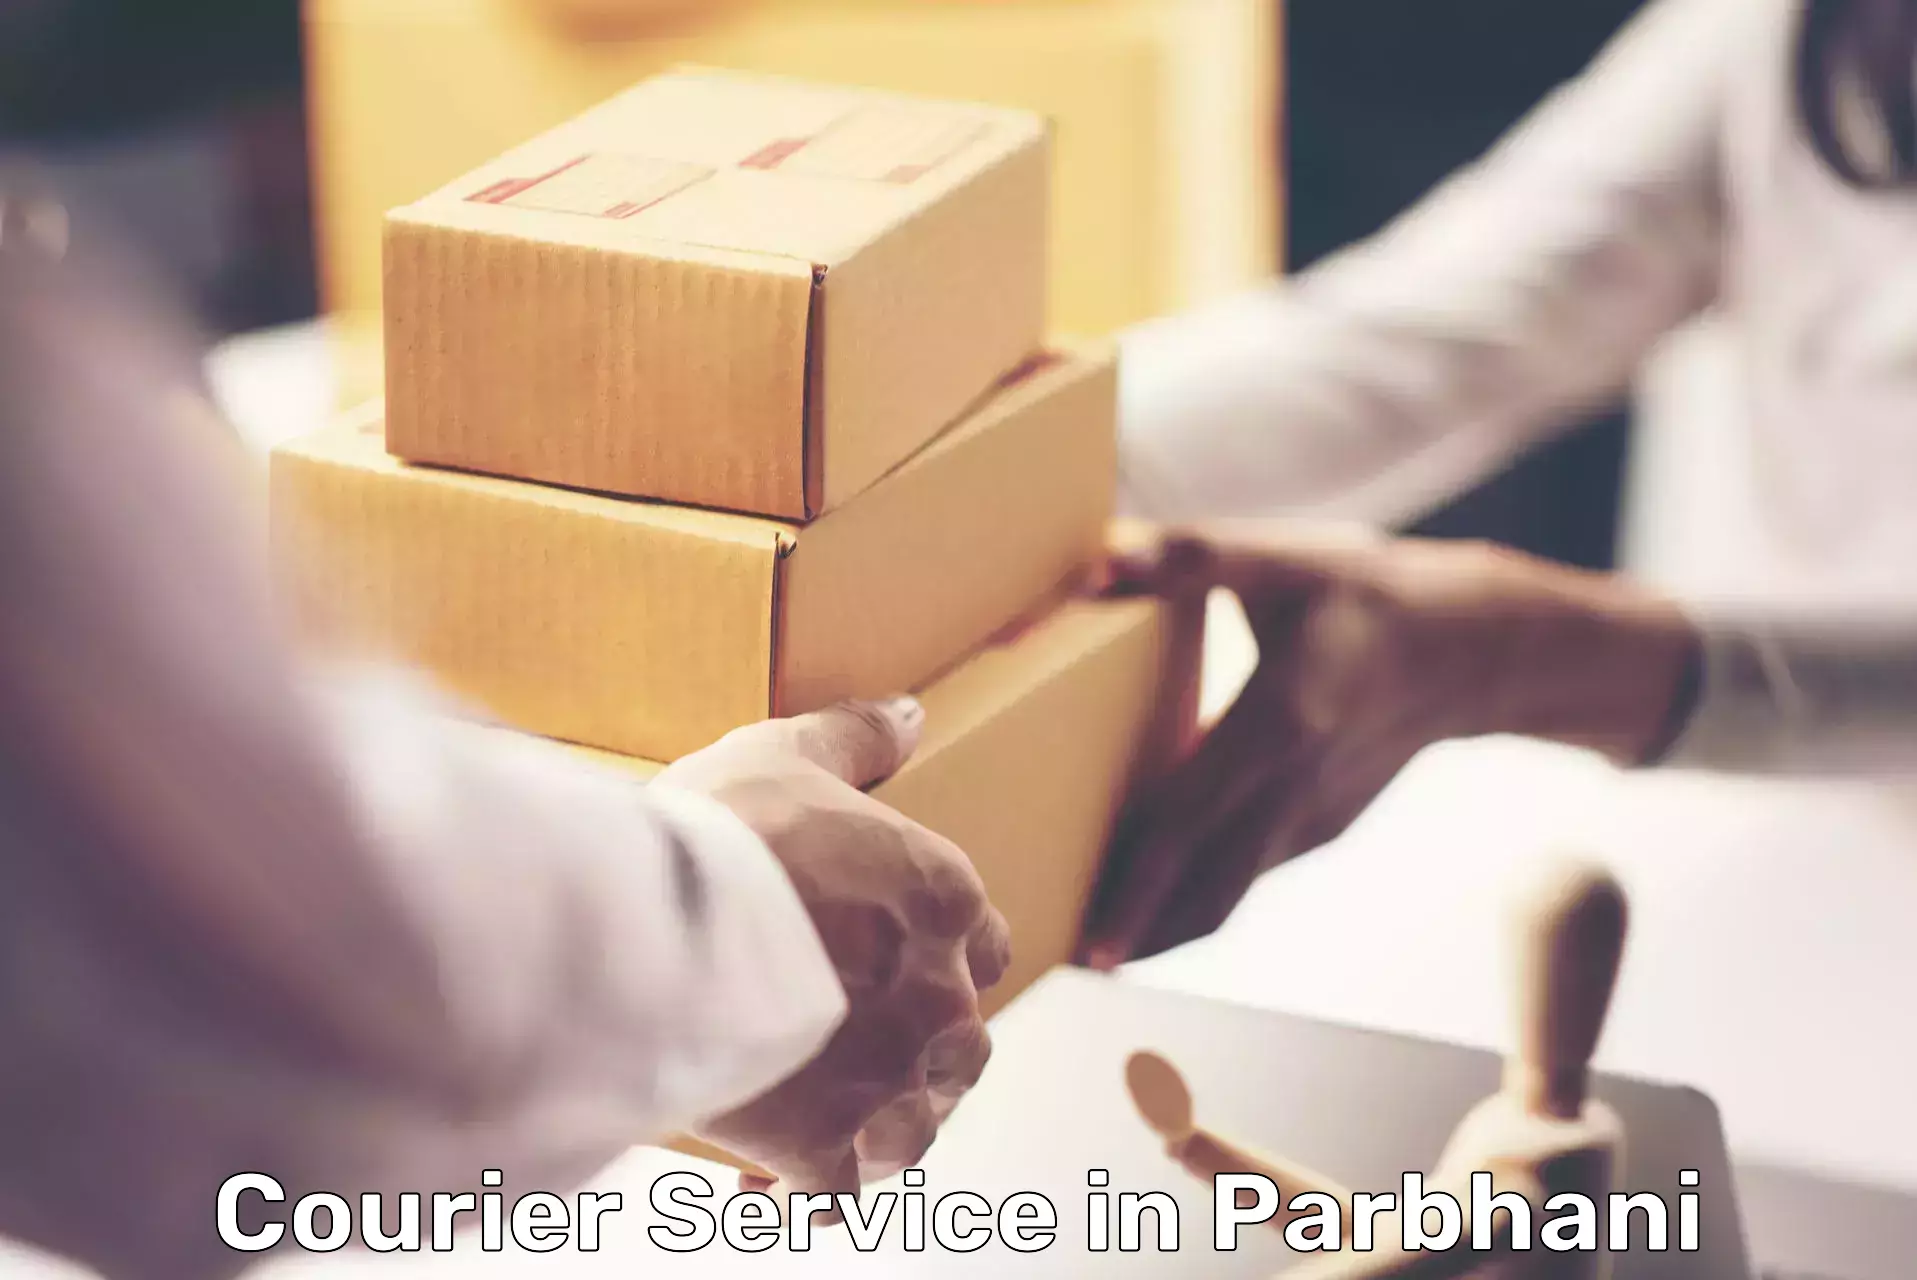 User-friendly delivery service in Parbhani